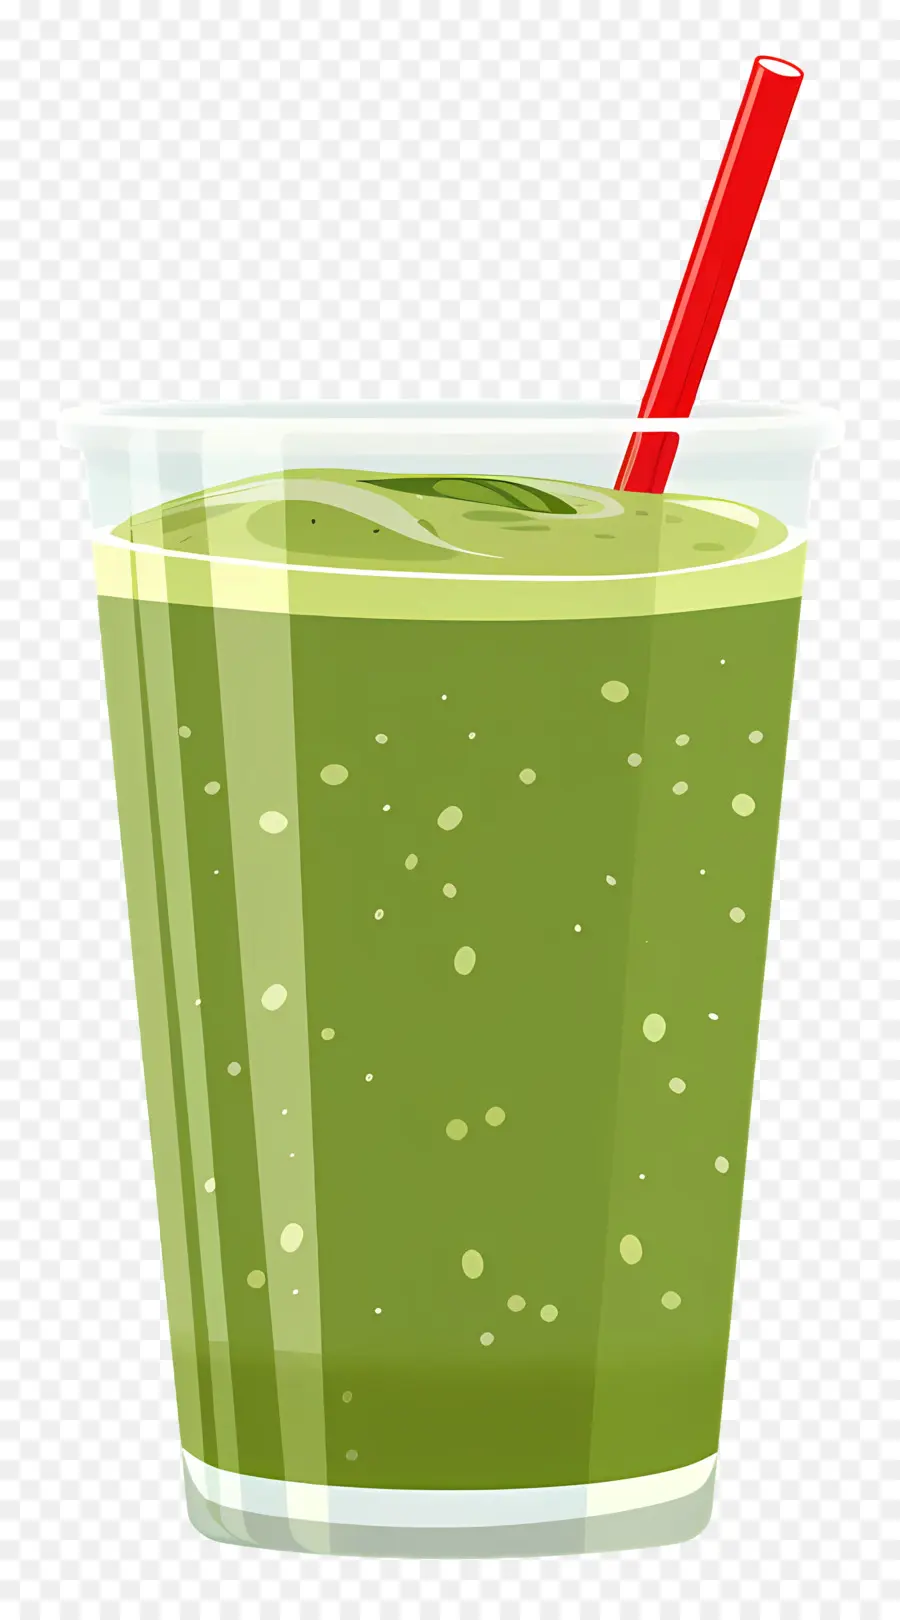 Matcha Boire，Smoothie Vert PNG